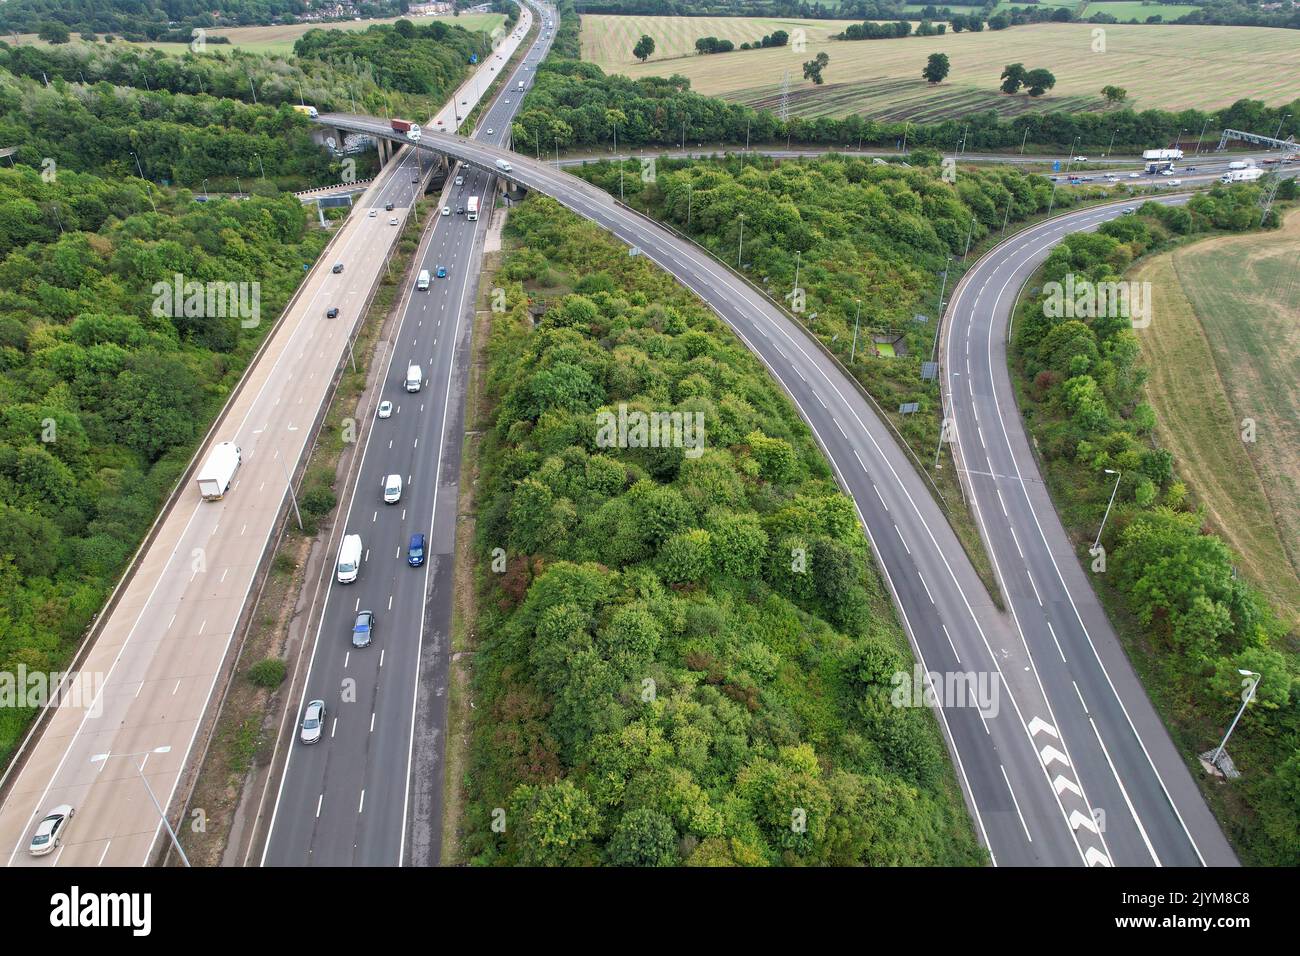 British Motorways and Highways Road with Traffic, high angle drone's ...